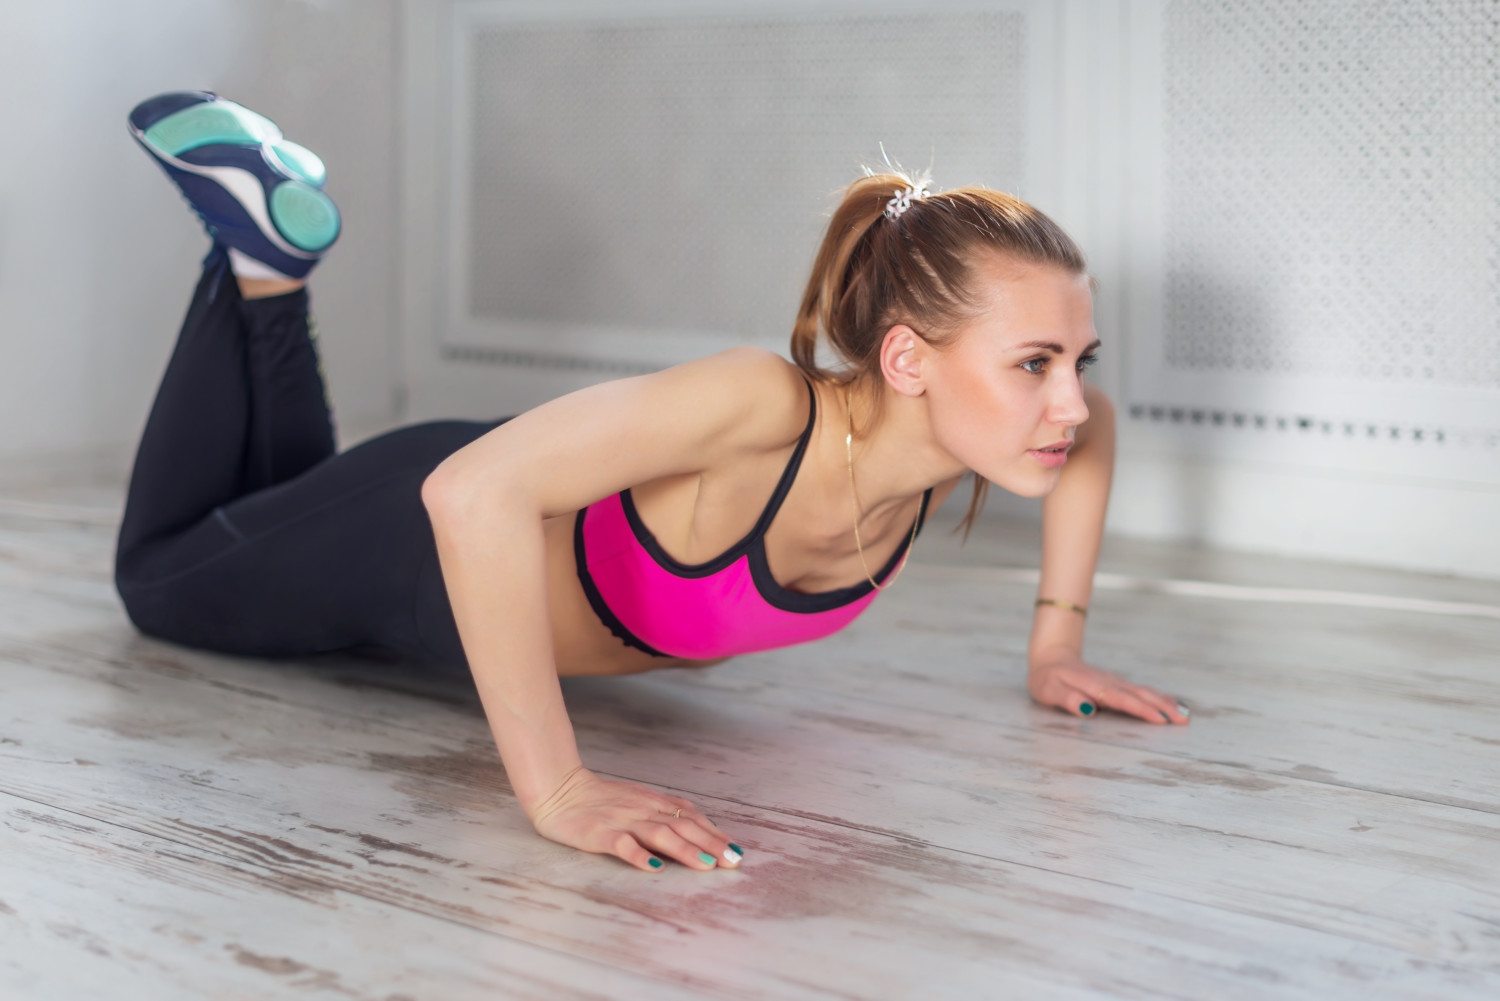 fitness athlete sportive woman sport model girl training crossfit doing push ups at home.